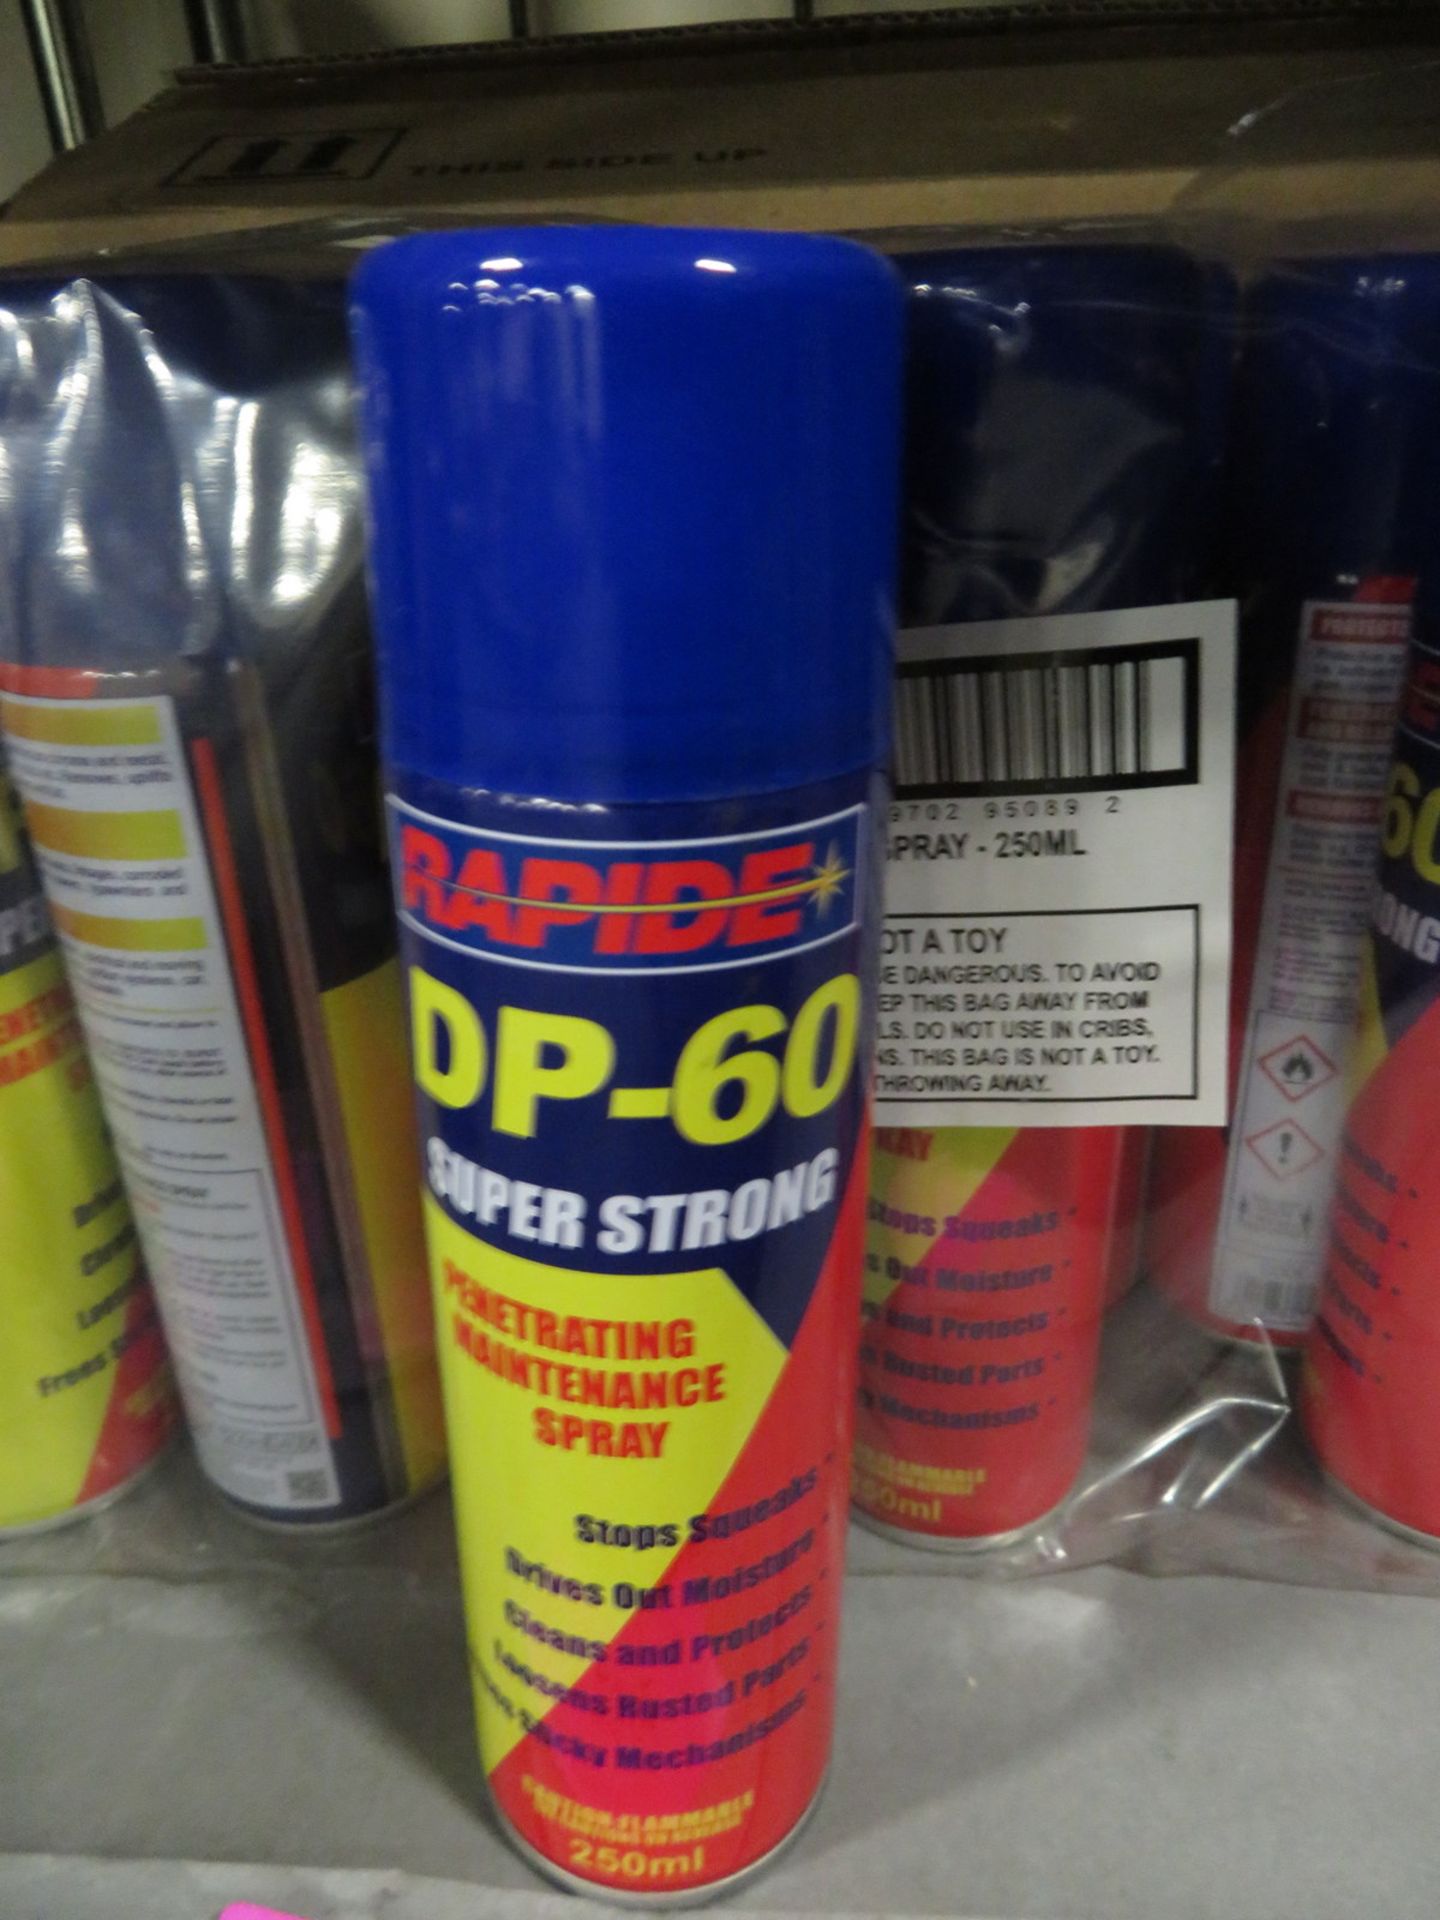 Rapide DP-60 Super strong penetrating maintenance spray - 250ml - 24 cans - Image 2 of 3